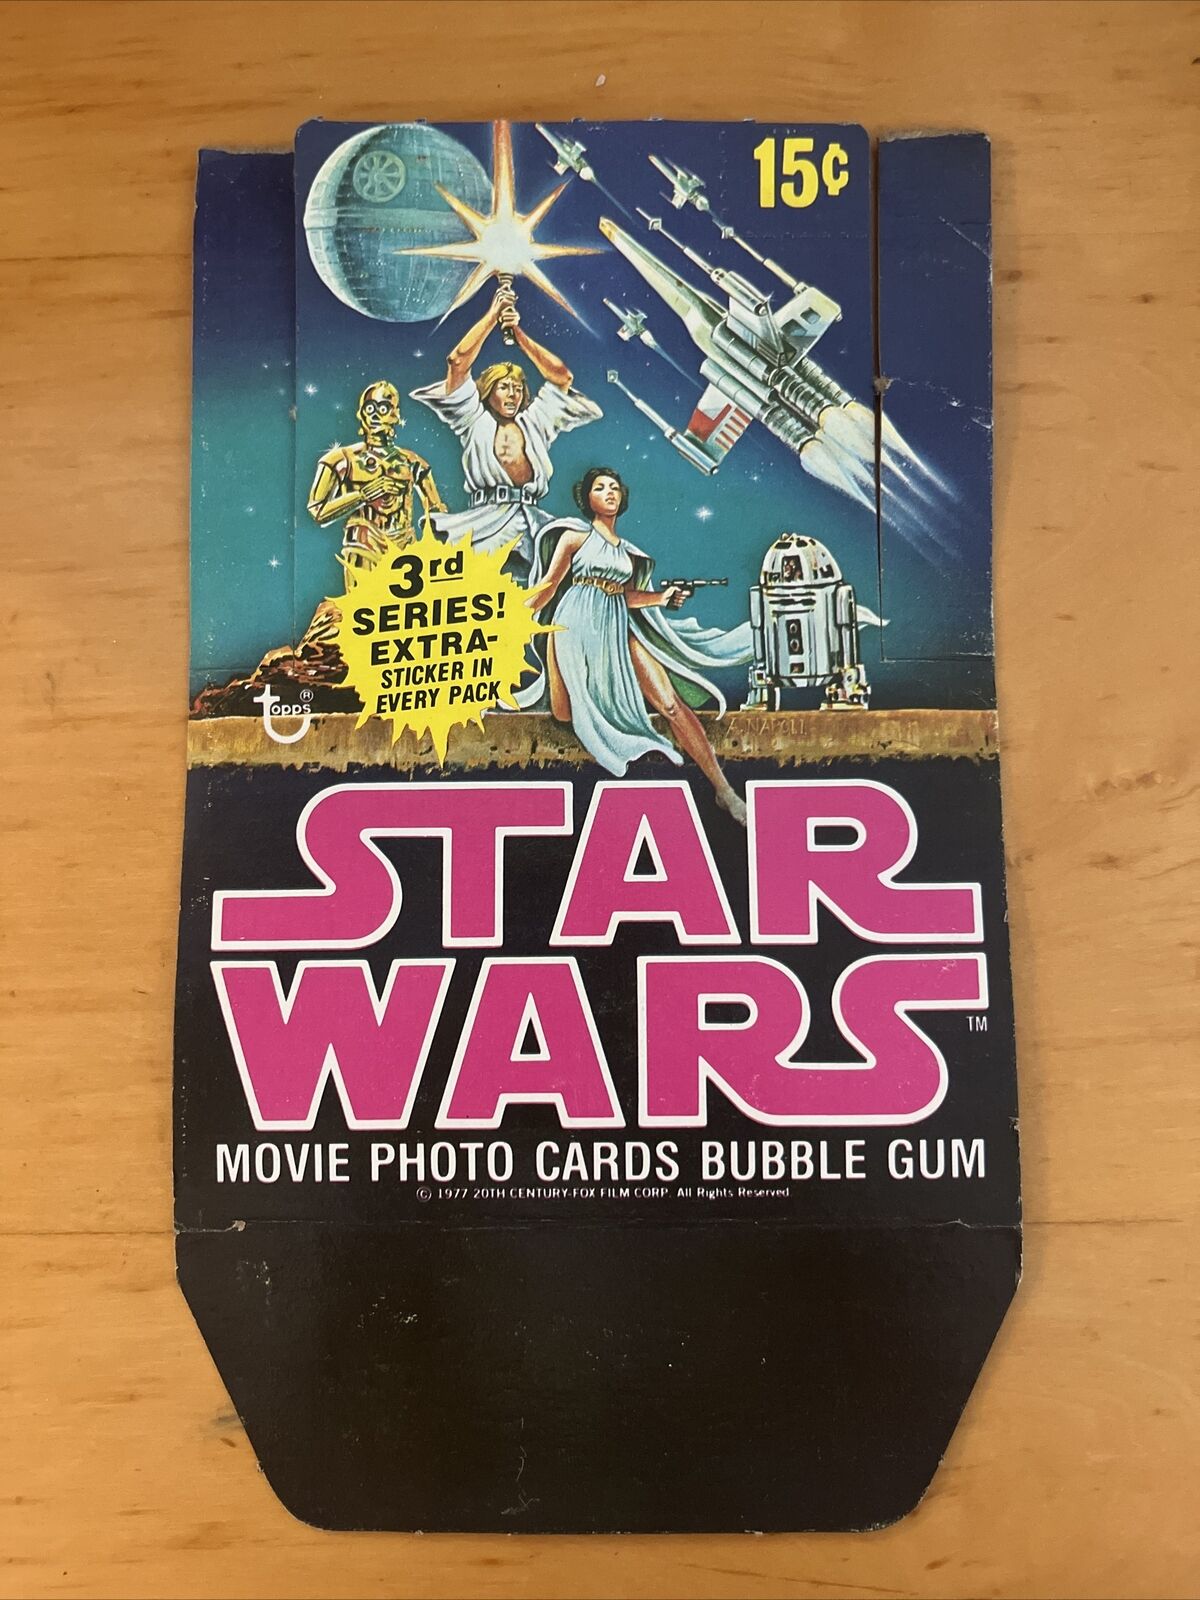 VINTAGE 1977 STAR WARS TOPPS TRADING CARD DISPLAY FRONT OF BOX 3rd SERIES Pink